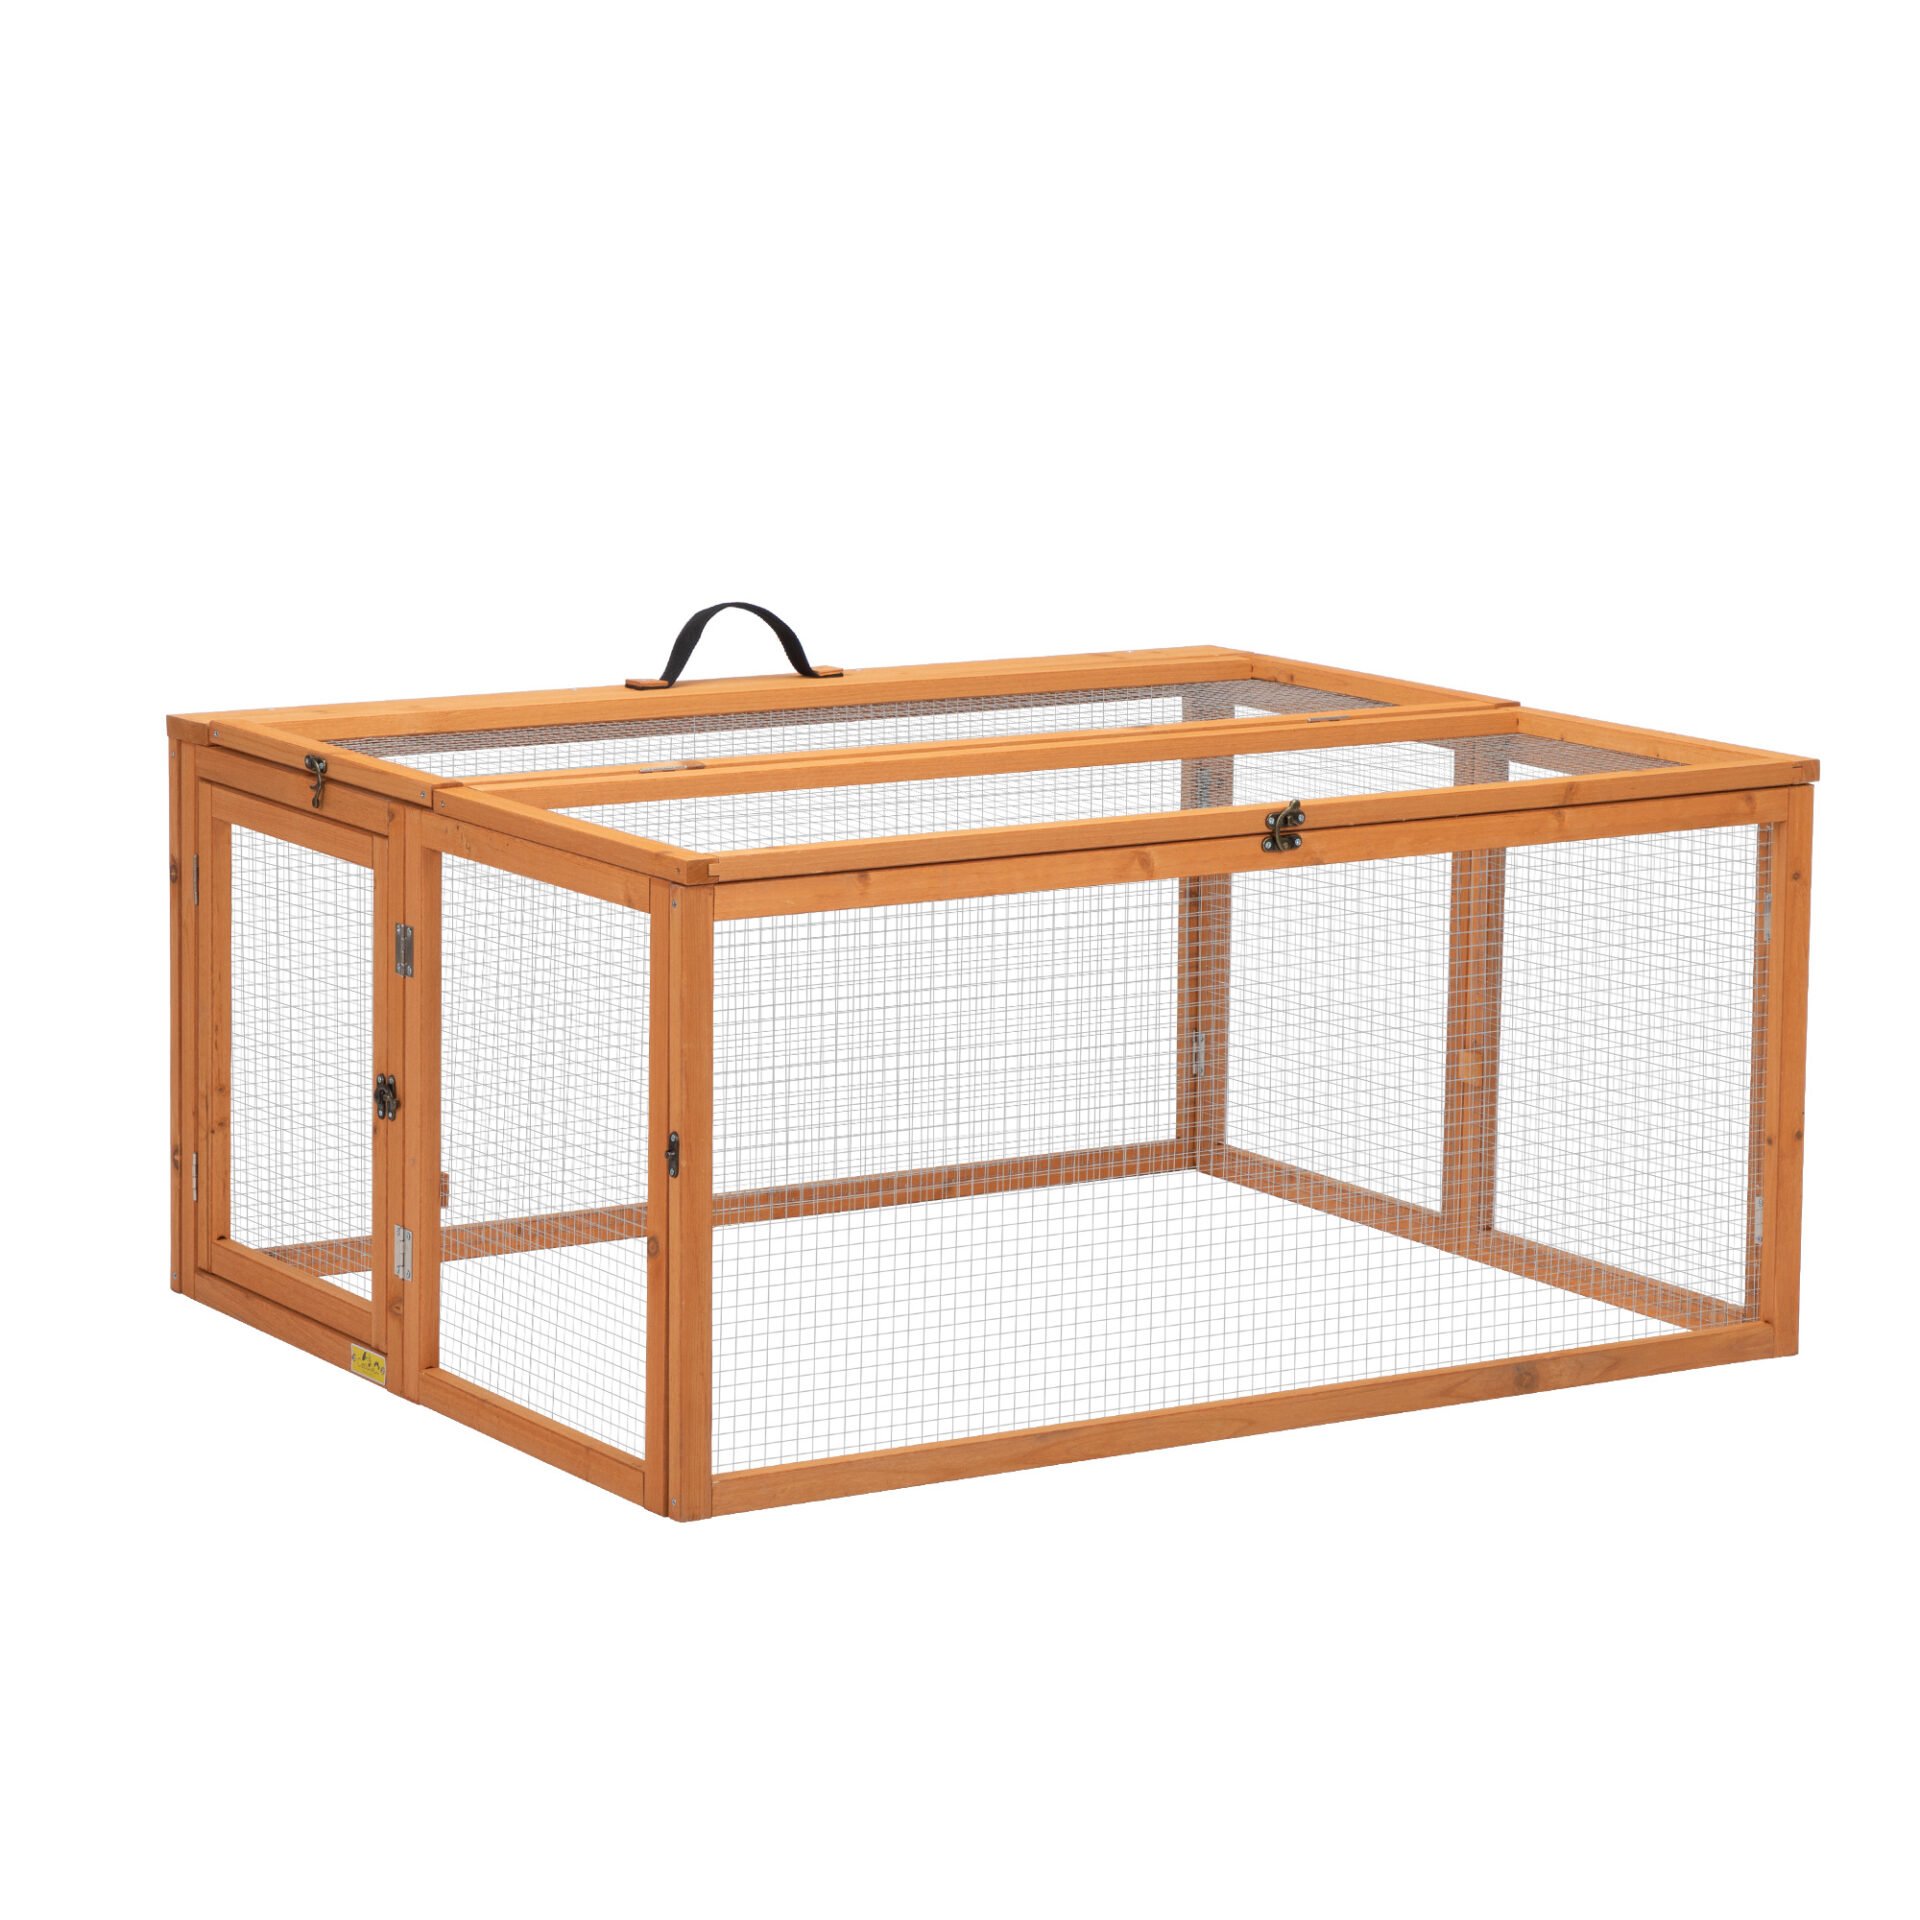 Coziwow Portable Folding Rabbit Hutch Outdoor Small Animal Coop Farm Enclosure with Openable Top, Wire-Mesh Windows, Orange CW12N0531 4